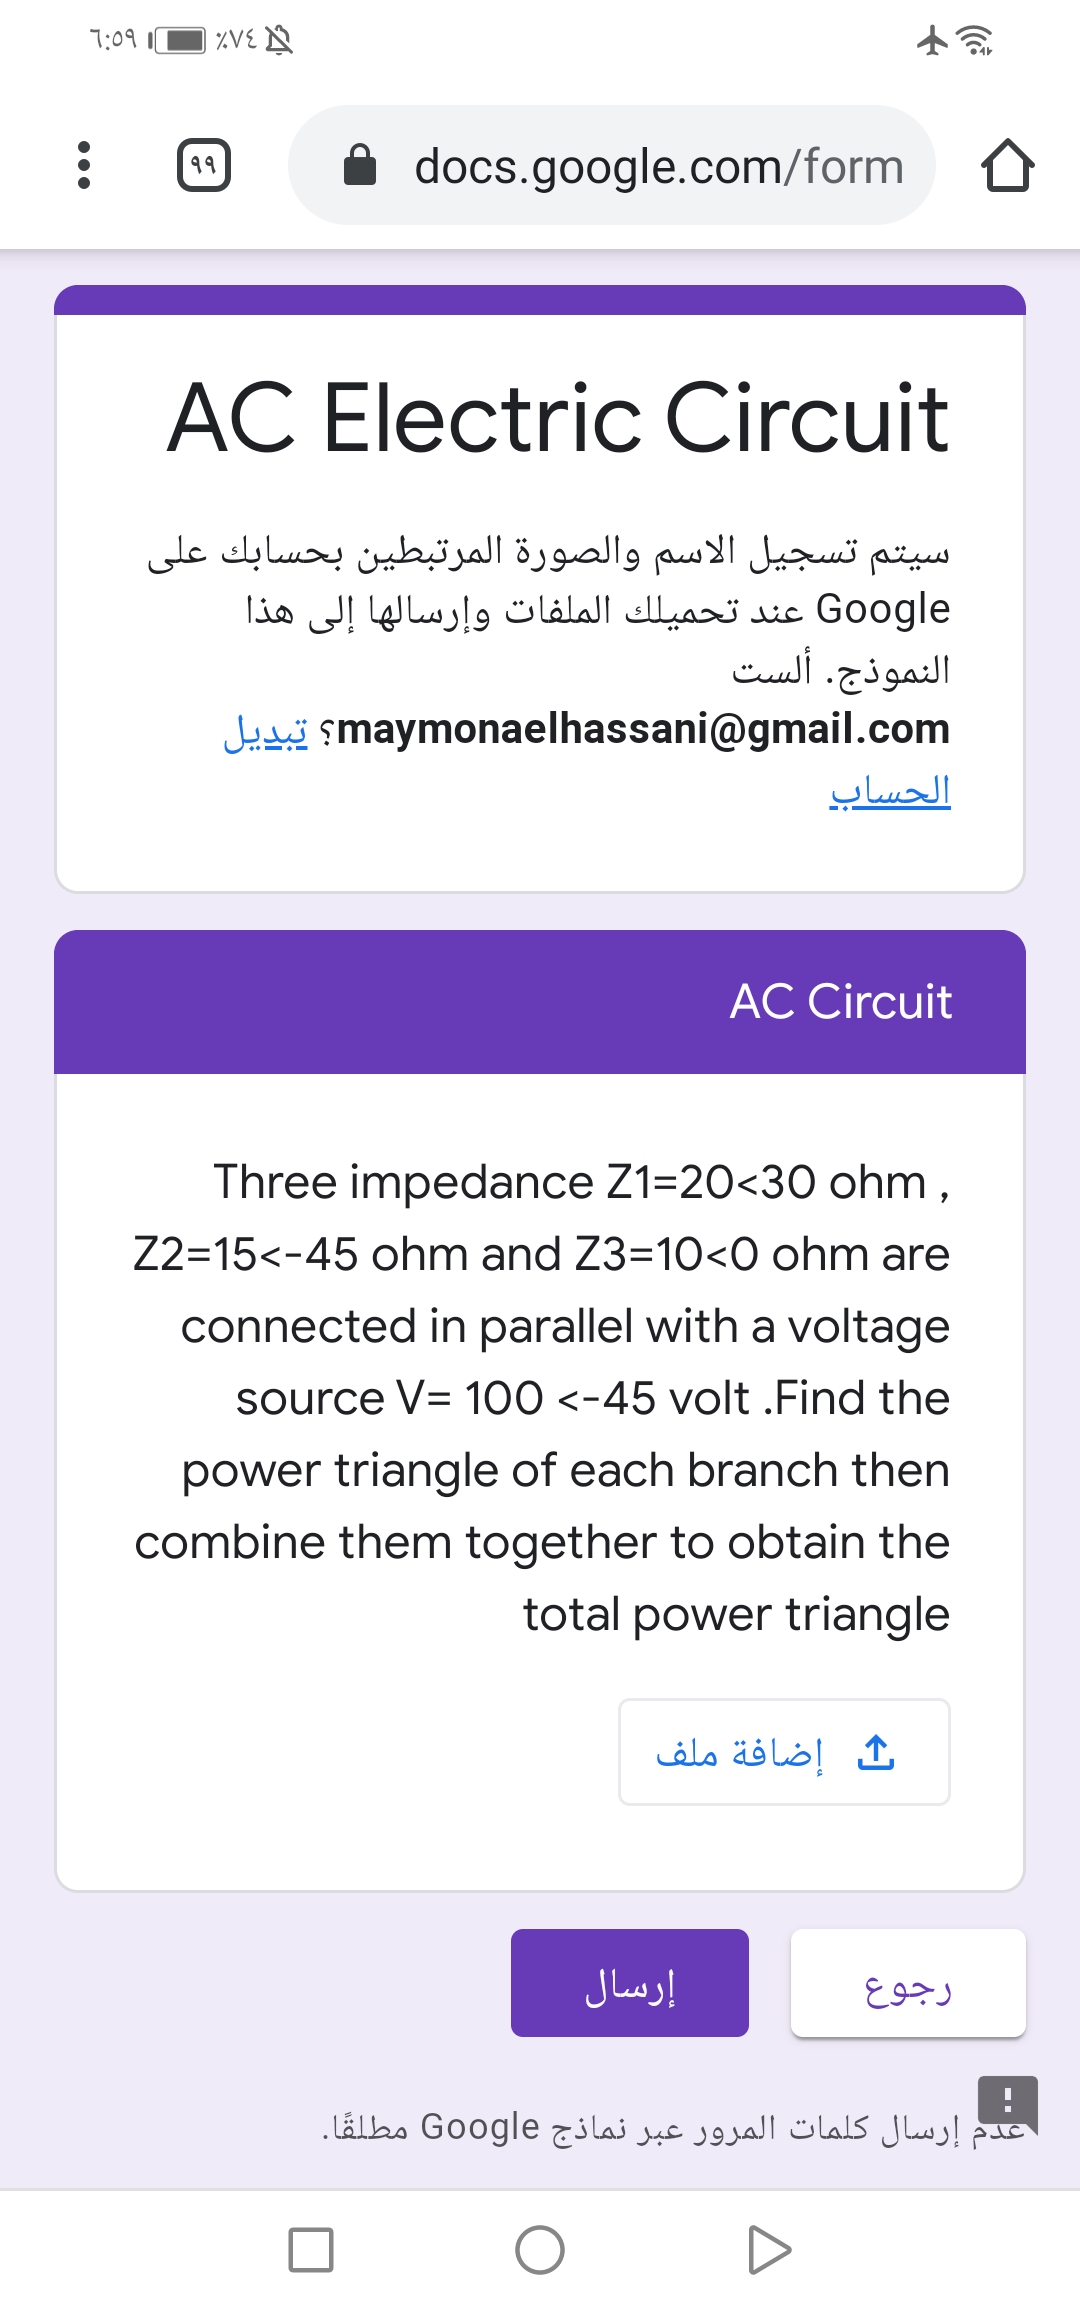 Z2=15<-45 ohm and Z3=10<O ohm are
connected in parallel with a voltage
source V= 100 <-45 volt .Find the
power triangle of each branch then
combine them together to obtain the
total power triangle
